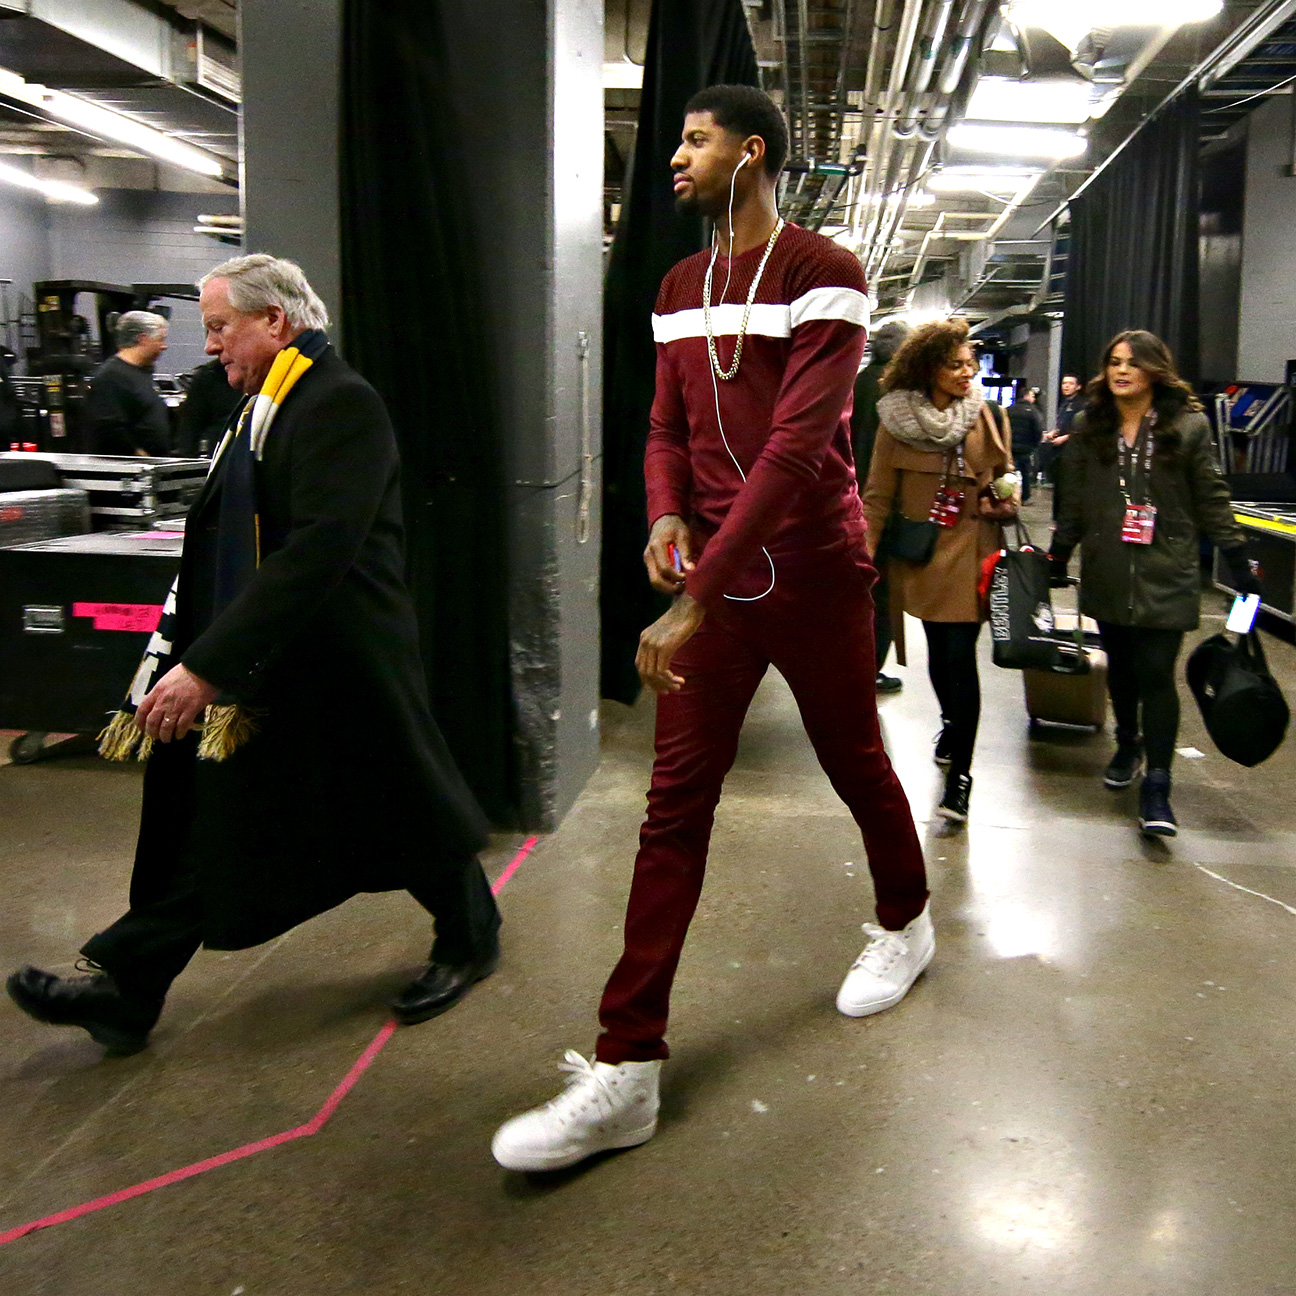 Fashion and Celebrities at NBA All-Star Weekend